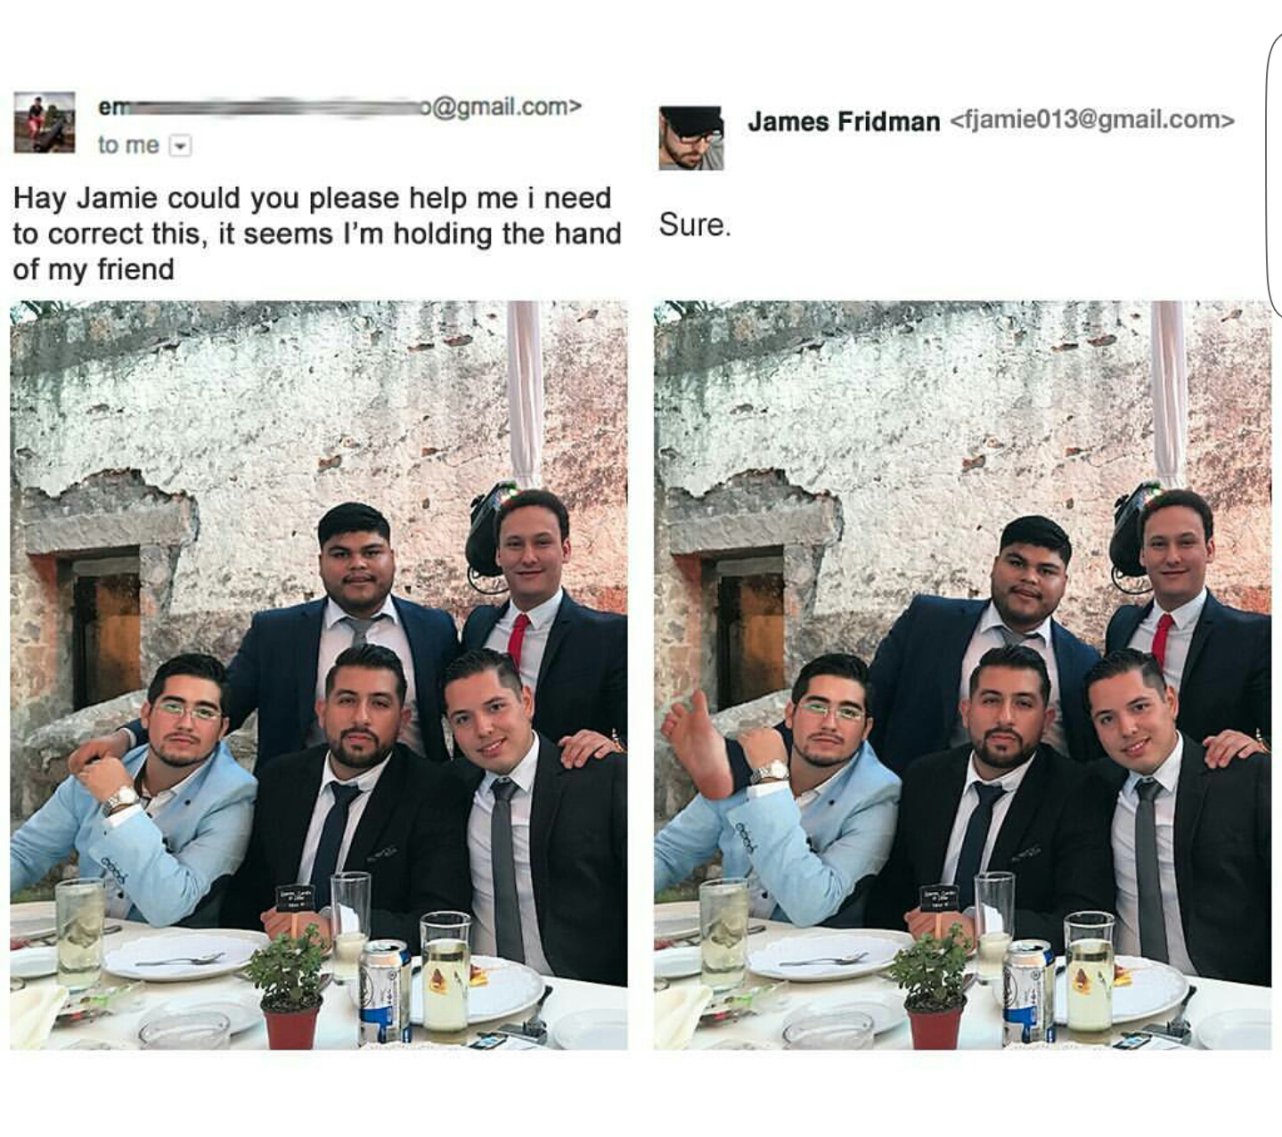 james fridman funny photoshop - em mo.com> James Fridman  to me Hay Jamie could you please help me i need to correct this, it seems I'm holding the hand of my friend Sure. 20